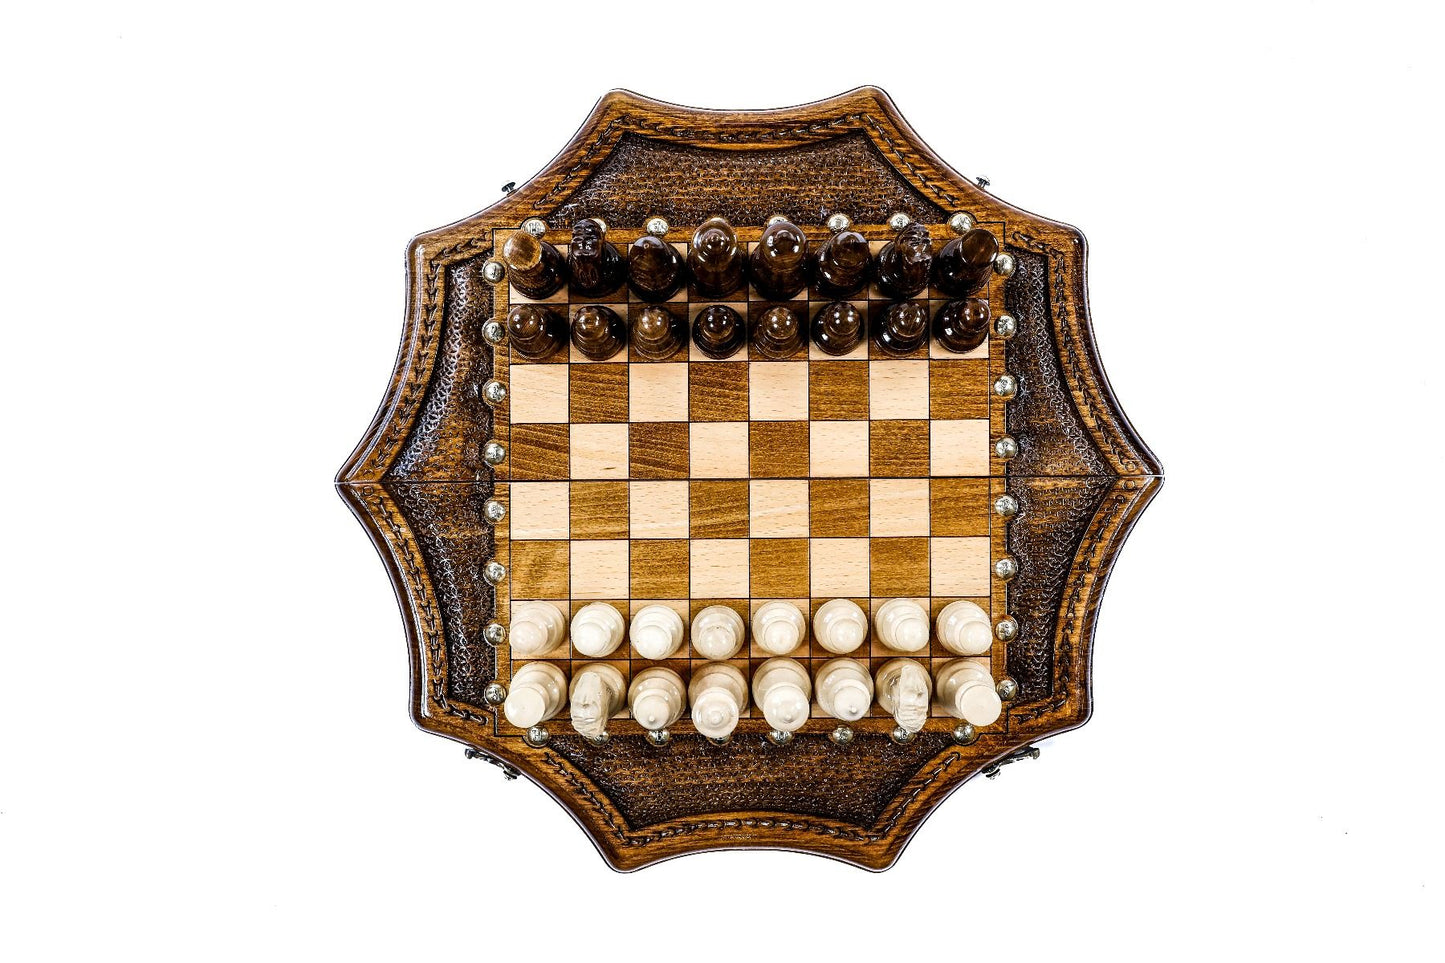 A testament to skilled artisanship, this unique luxury chess set invites players to explore the game within a framework of creativity, elegance, and tradition.